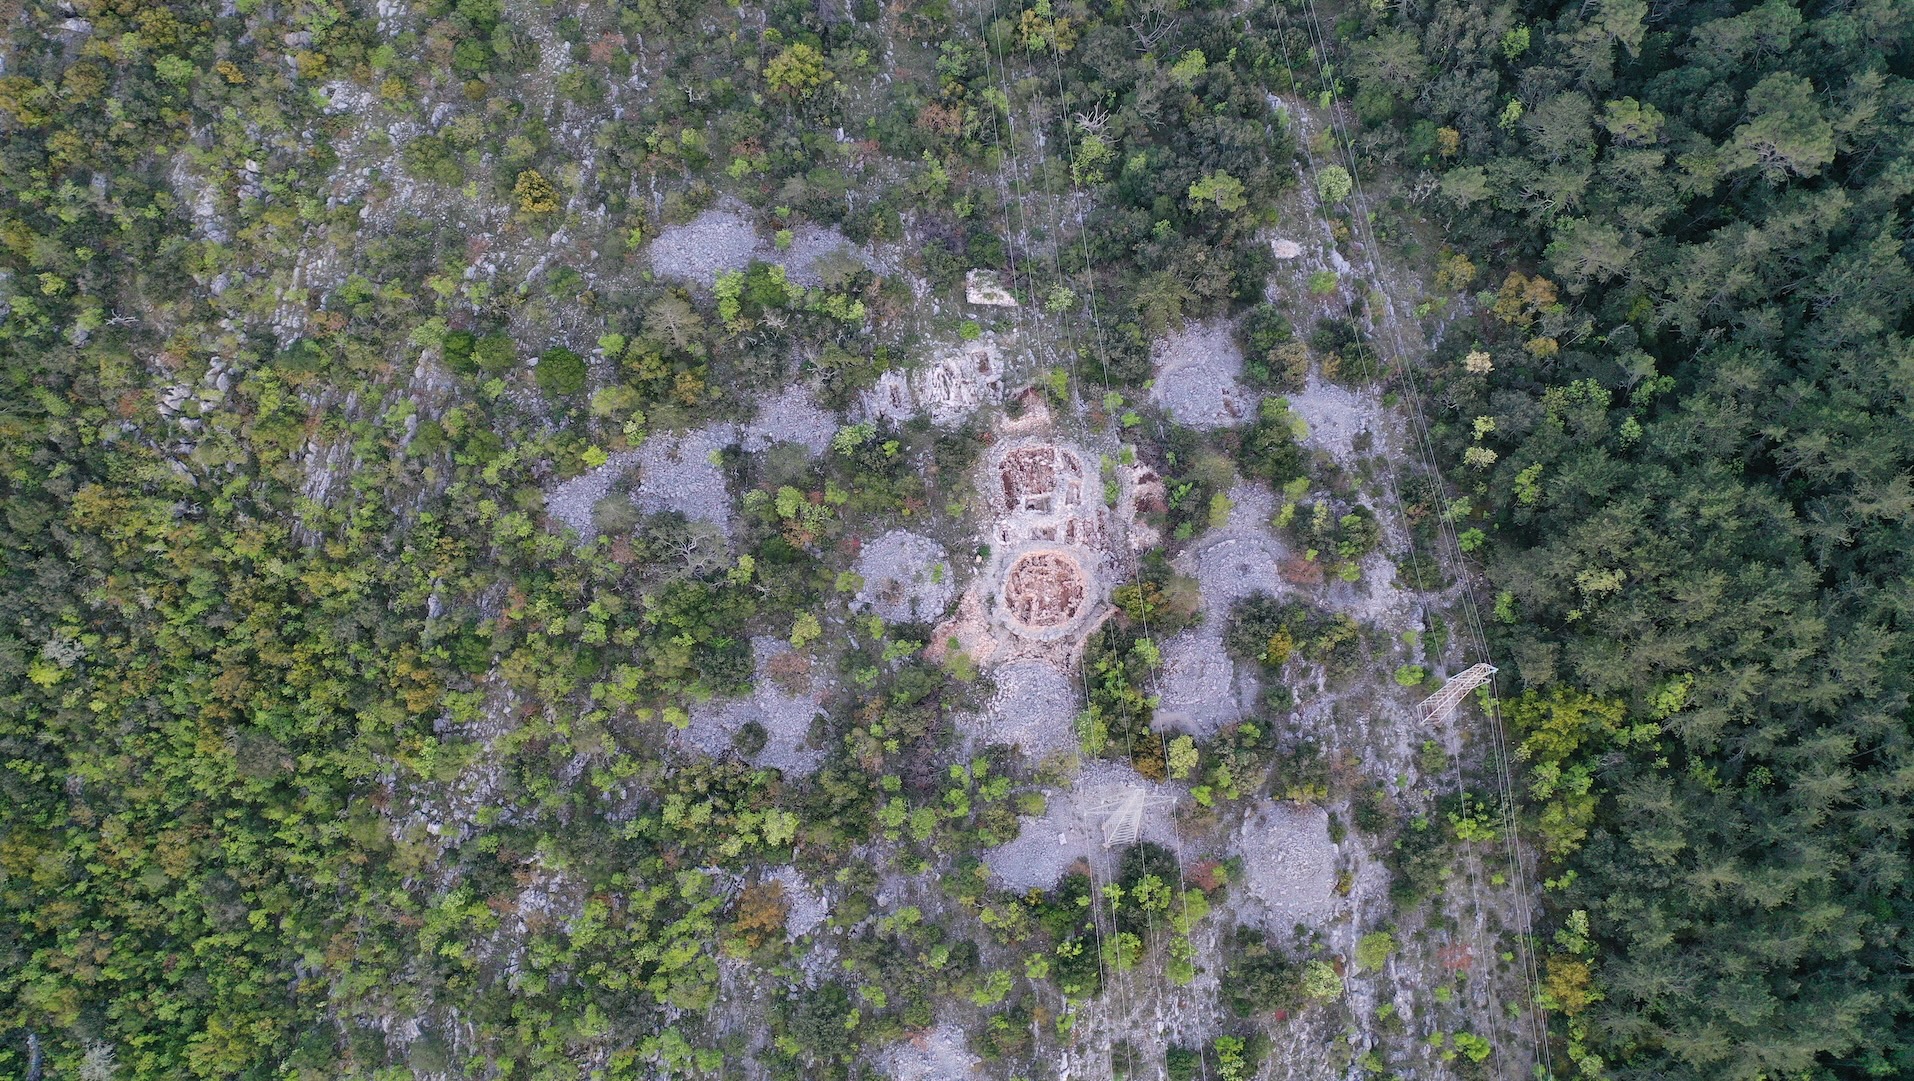 Aerial view of a mound necropolis in Croatia. We see a lot of trees and some bare stone patches.